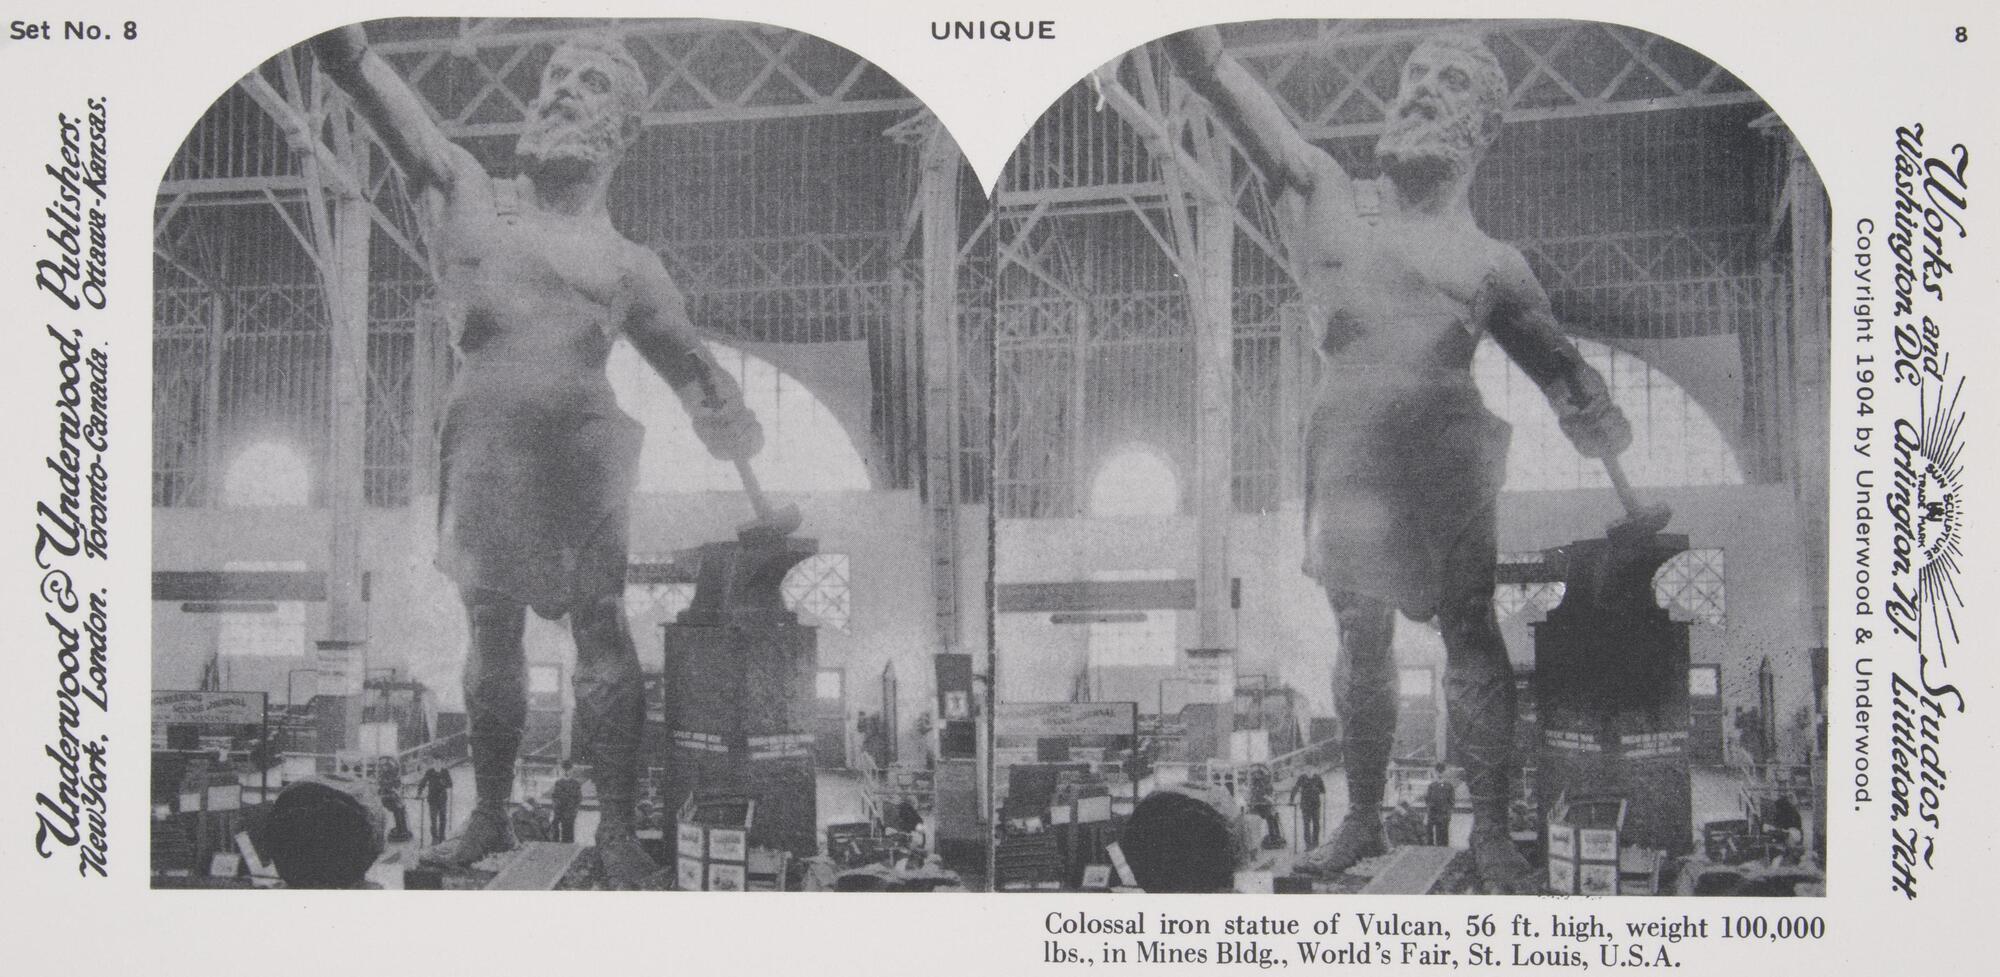 This black and white stereoscopic image features two images of an enormous statue of Vulcan with an outstretched arm in an iron building with small men standing at his feet.  It is surrounded by the text: Set No. 8; Underwood &amp; Underwood, Publishers, Unique; Colossal iron statue of Vulcan, 56 ft. high, weight 100,000 lbs., in Mines Bldg., World’s Fair, St. Louis, U.S.A.<br />